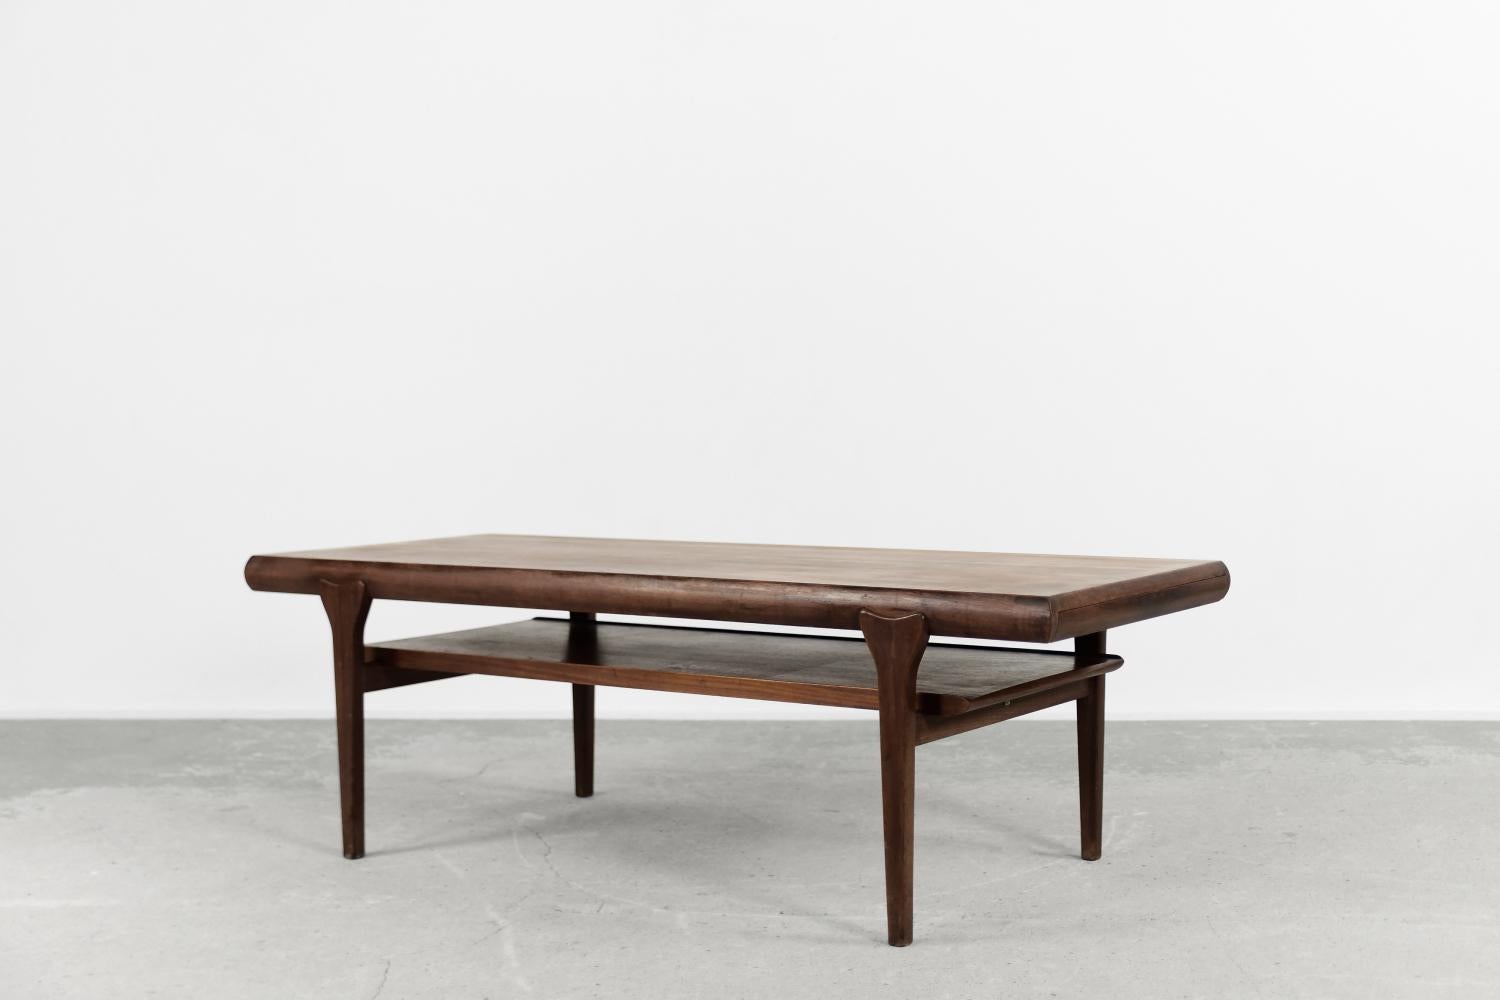 This extendable coffee table was made in Denmark during the 1960s. It is made of strong teak wood in a dark shade of brown. The functional table has a shelf and a pull-out drawer with compartments for small items. The other side of the top slides